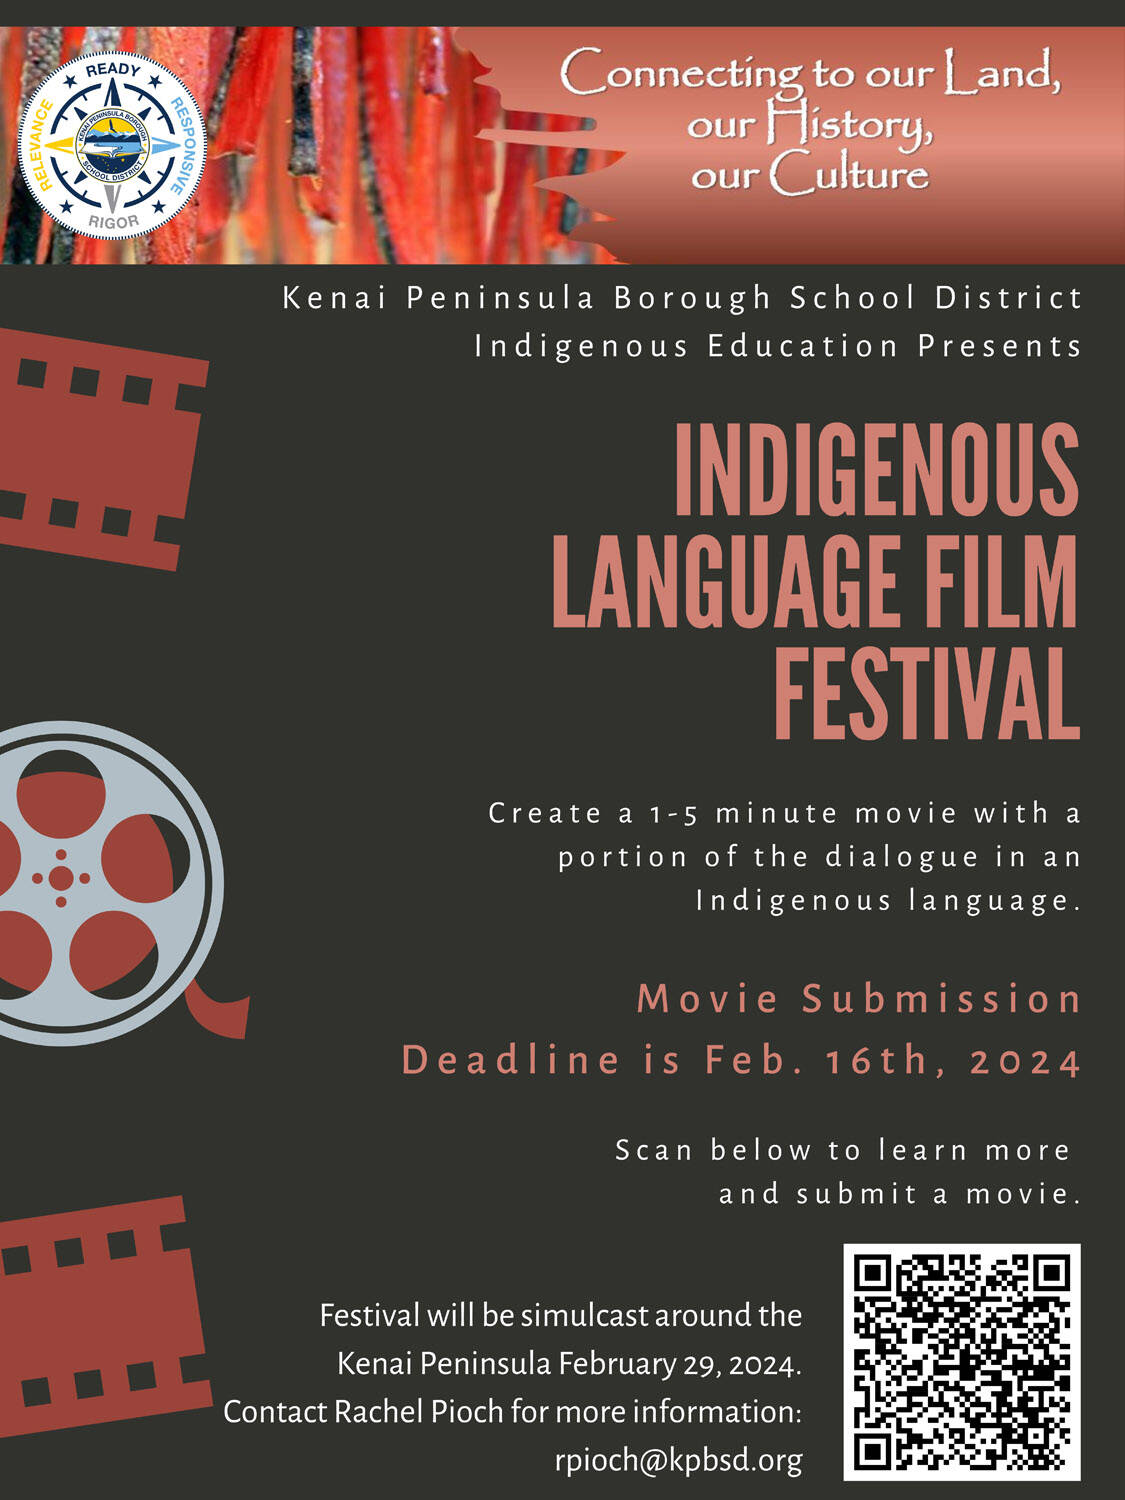 Poster for 2nd Annual Indigenous Language Film Festival. (Provided by Kenai Peninsula Borough School District’s Indigenous Education Progam)